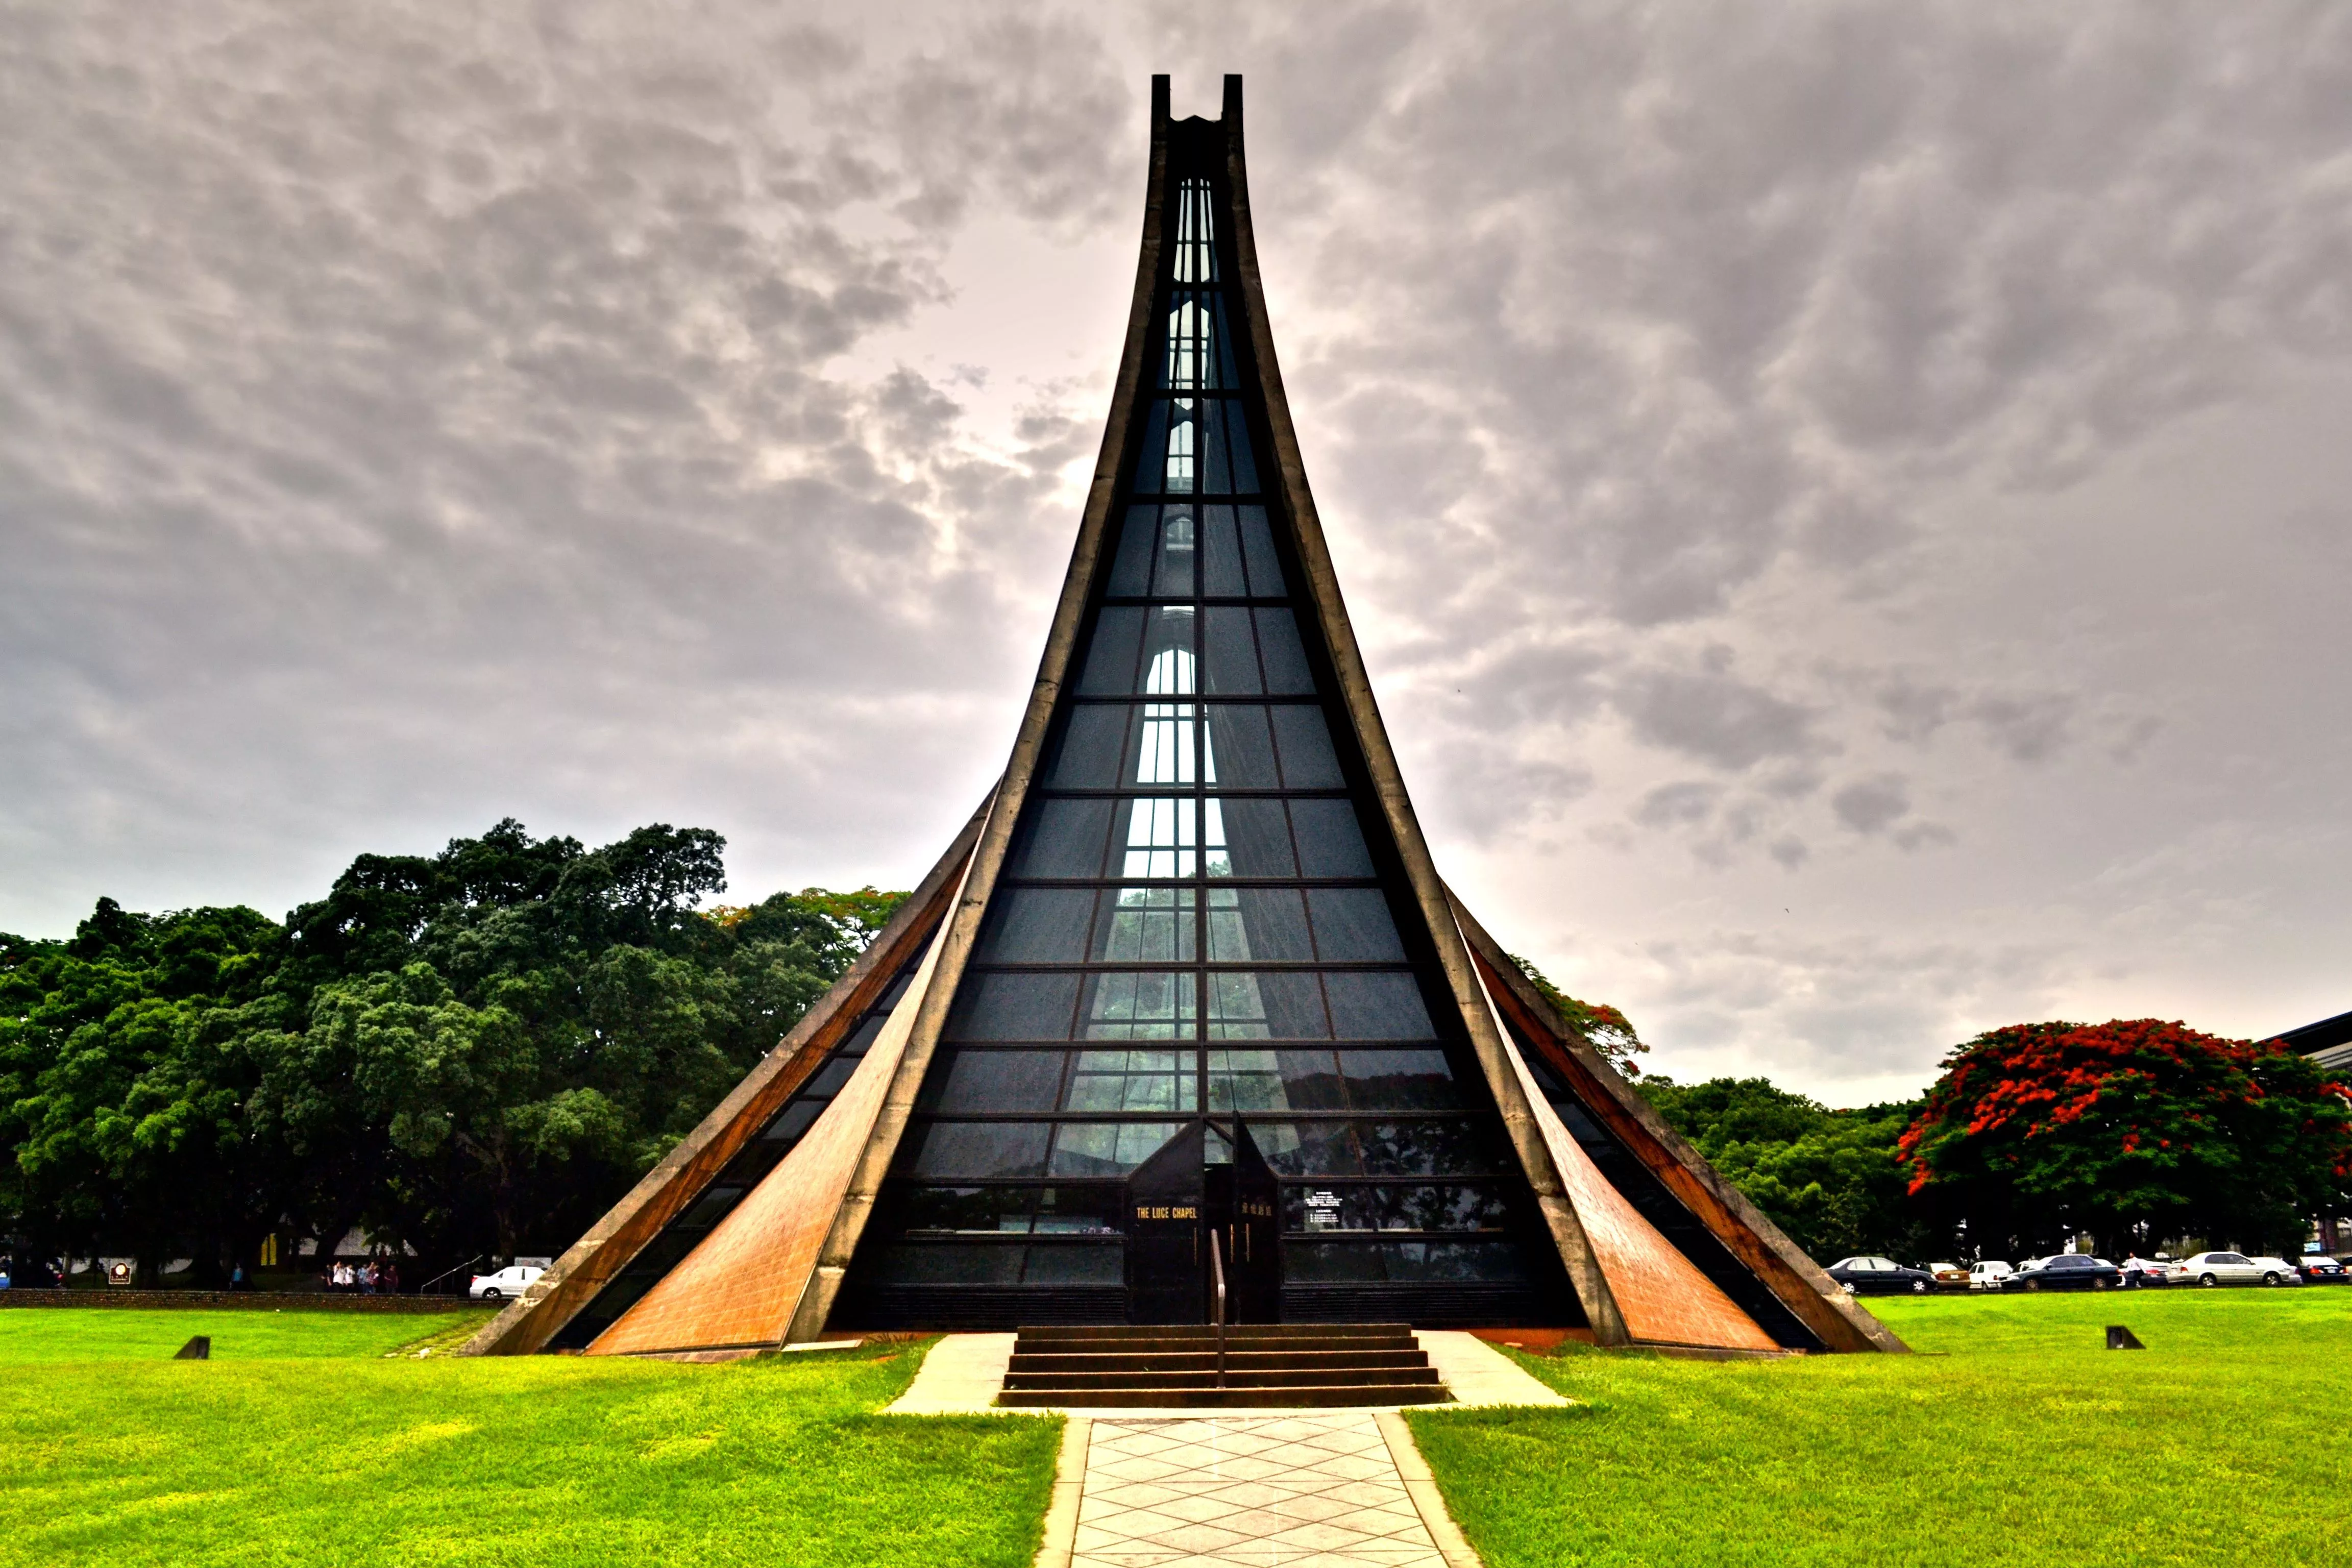 Luce Memorial Chapel in Taiwan, East Asia | Architecture - Rated 3.7